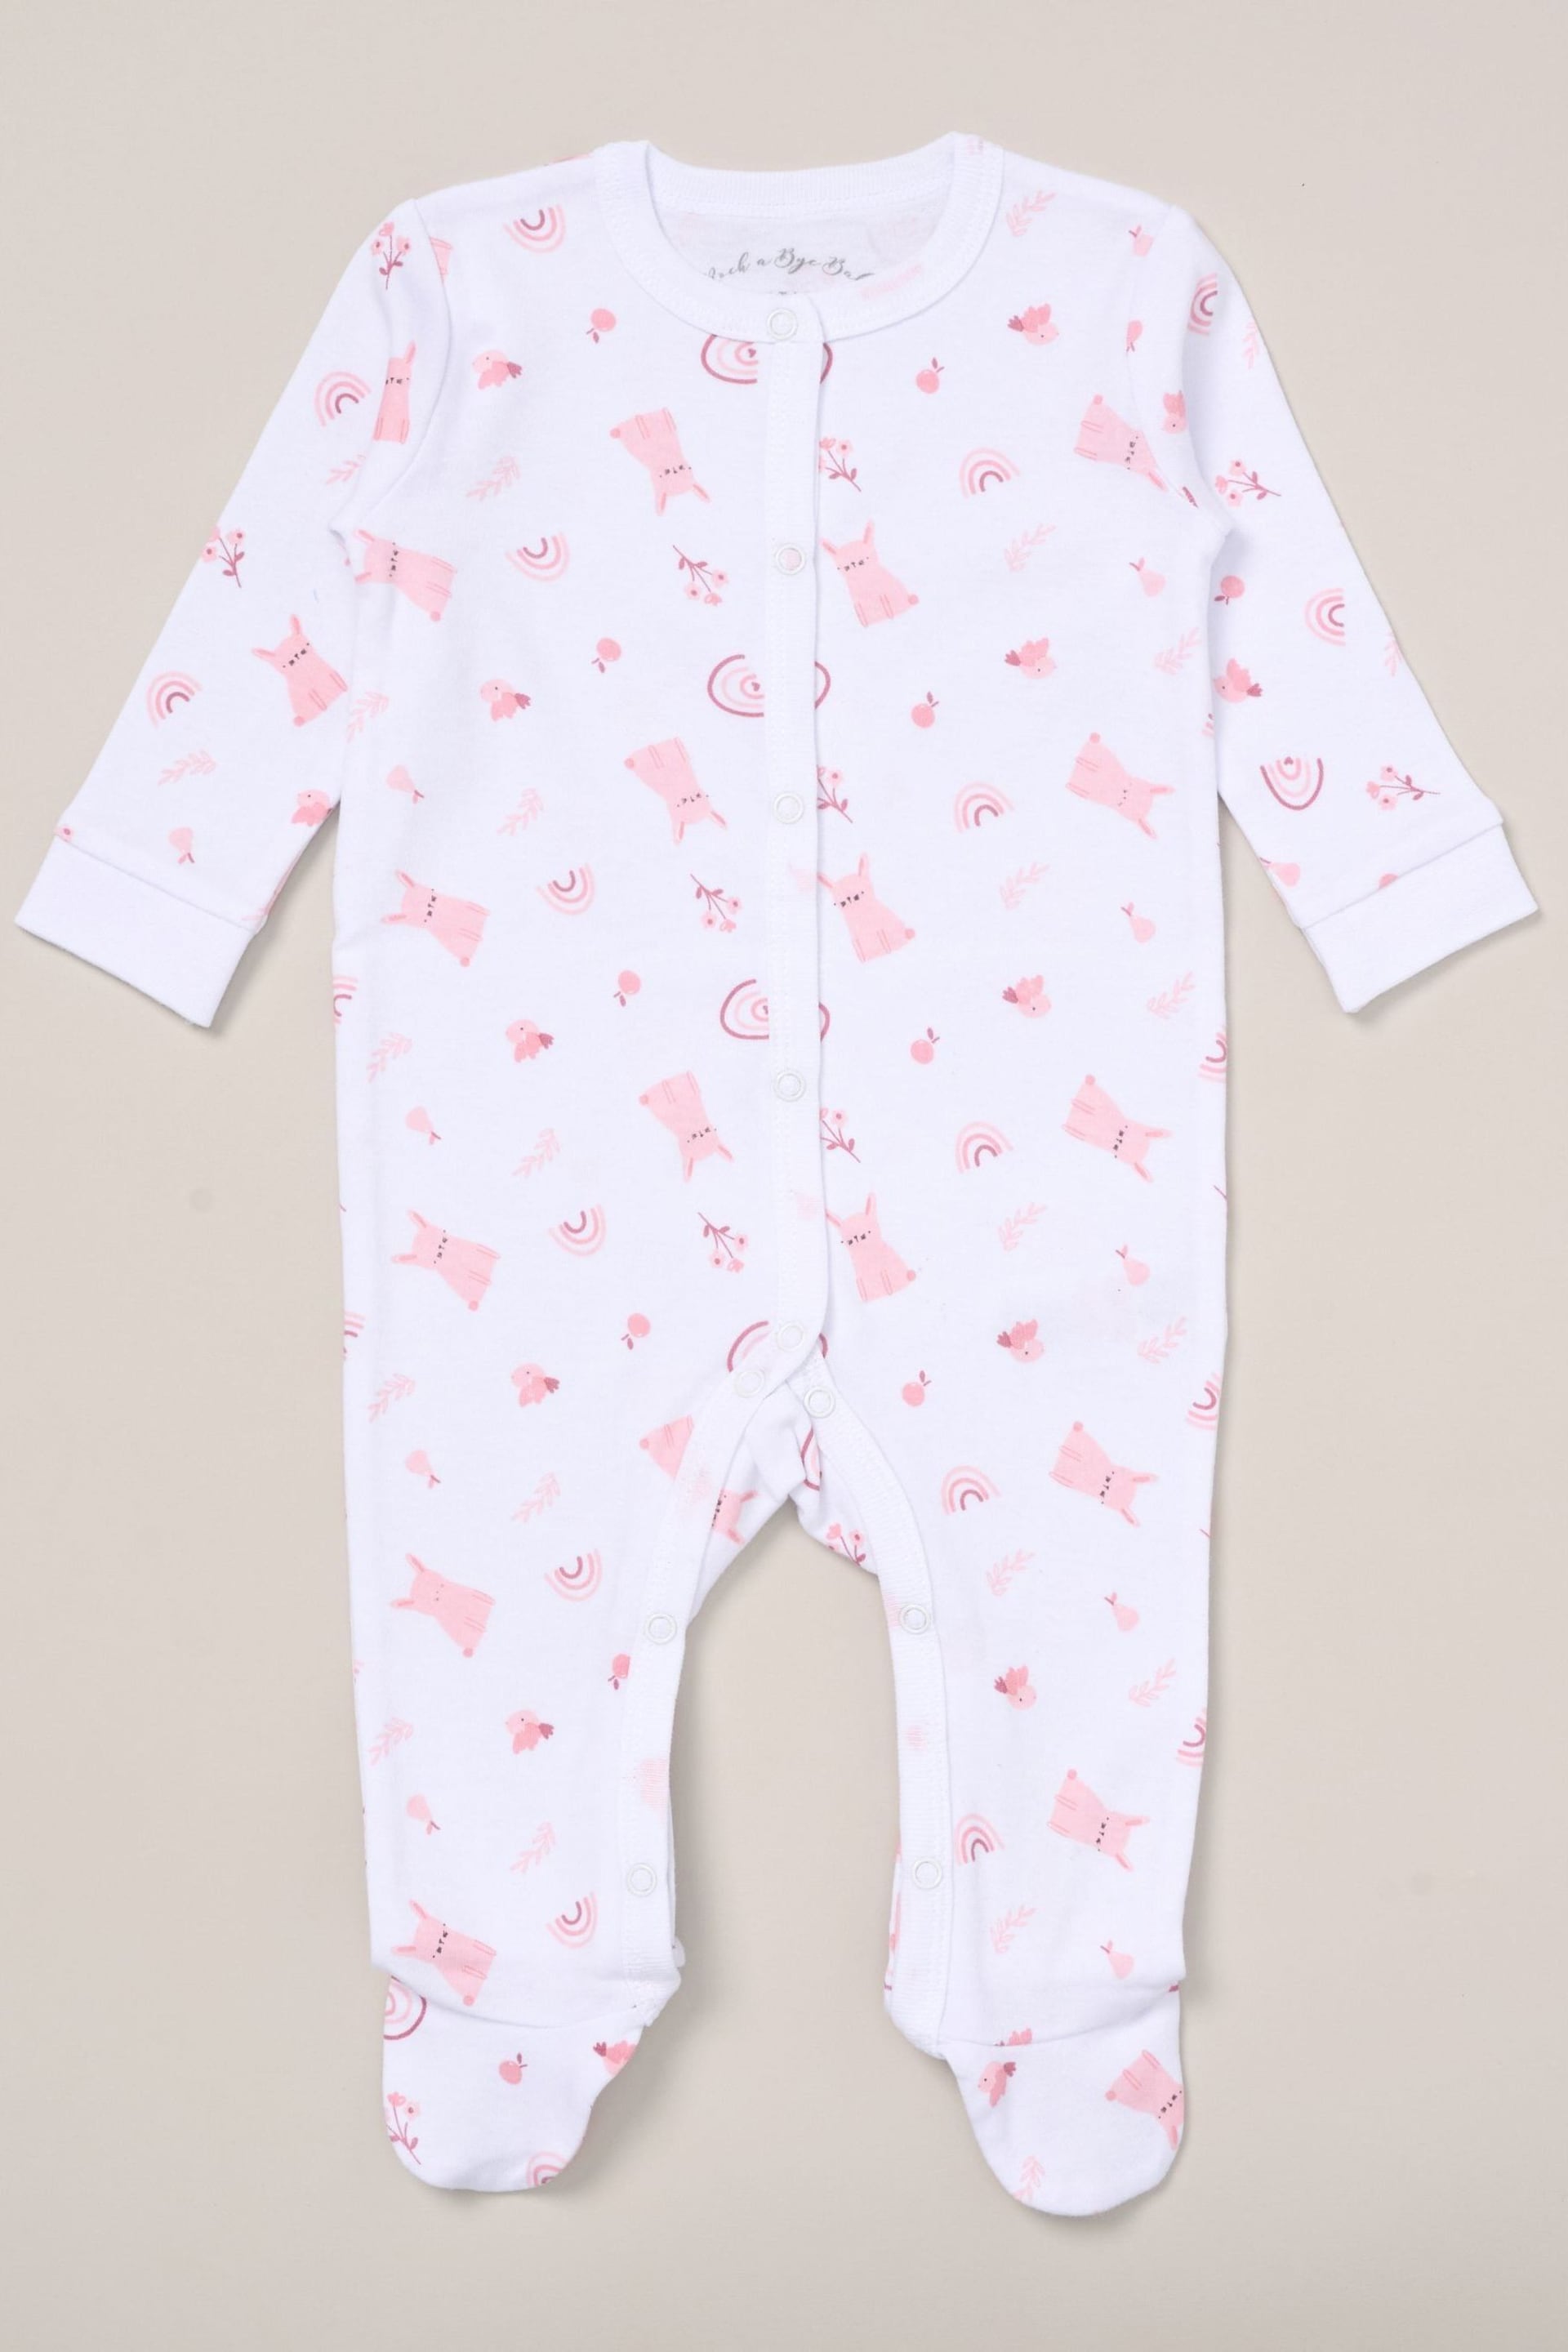 Rock-A-Bye Baby Boutique Pink Printed All in One Cotton 5-Piece Baby Gift Set - Image 3 of 5